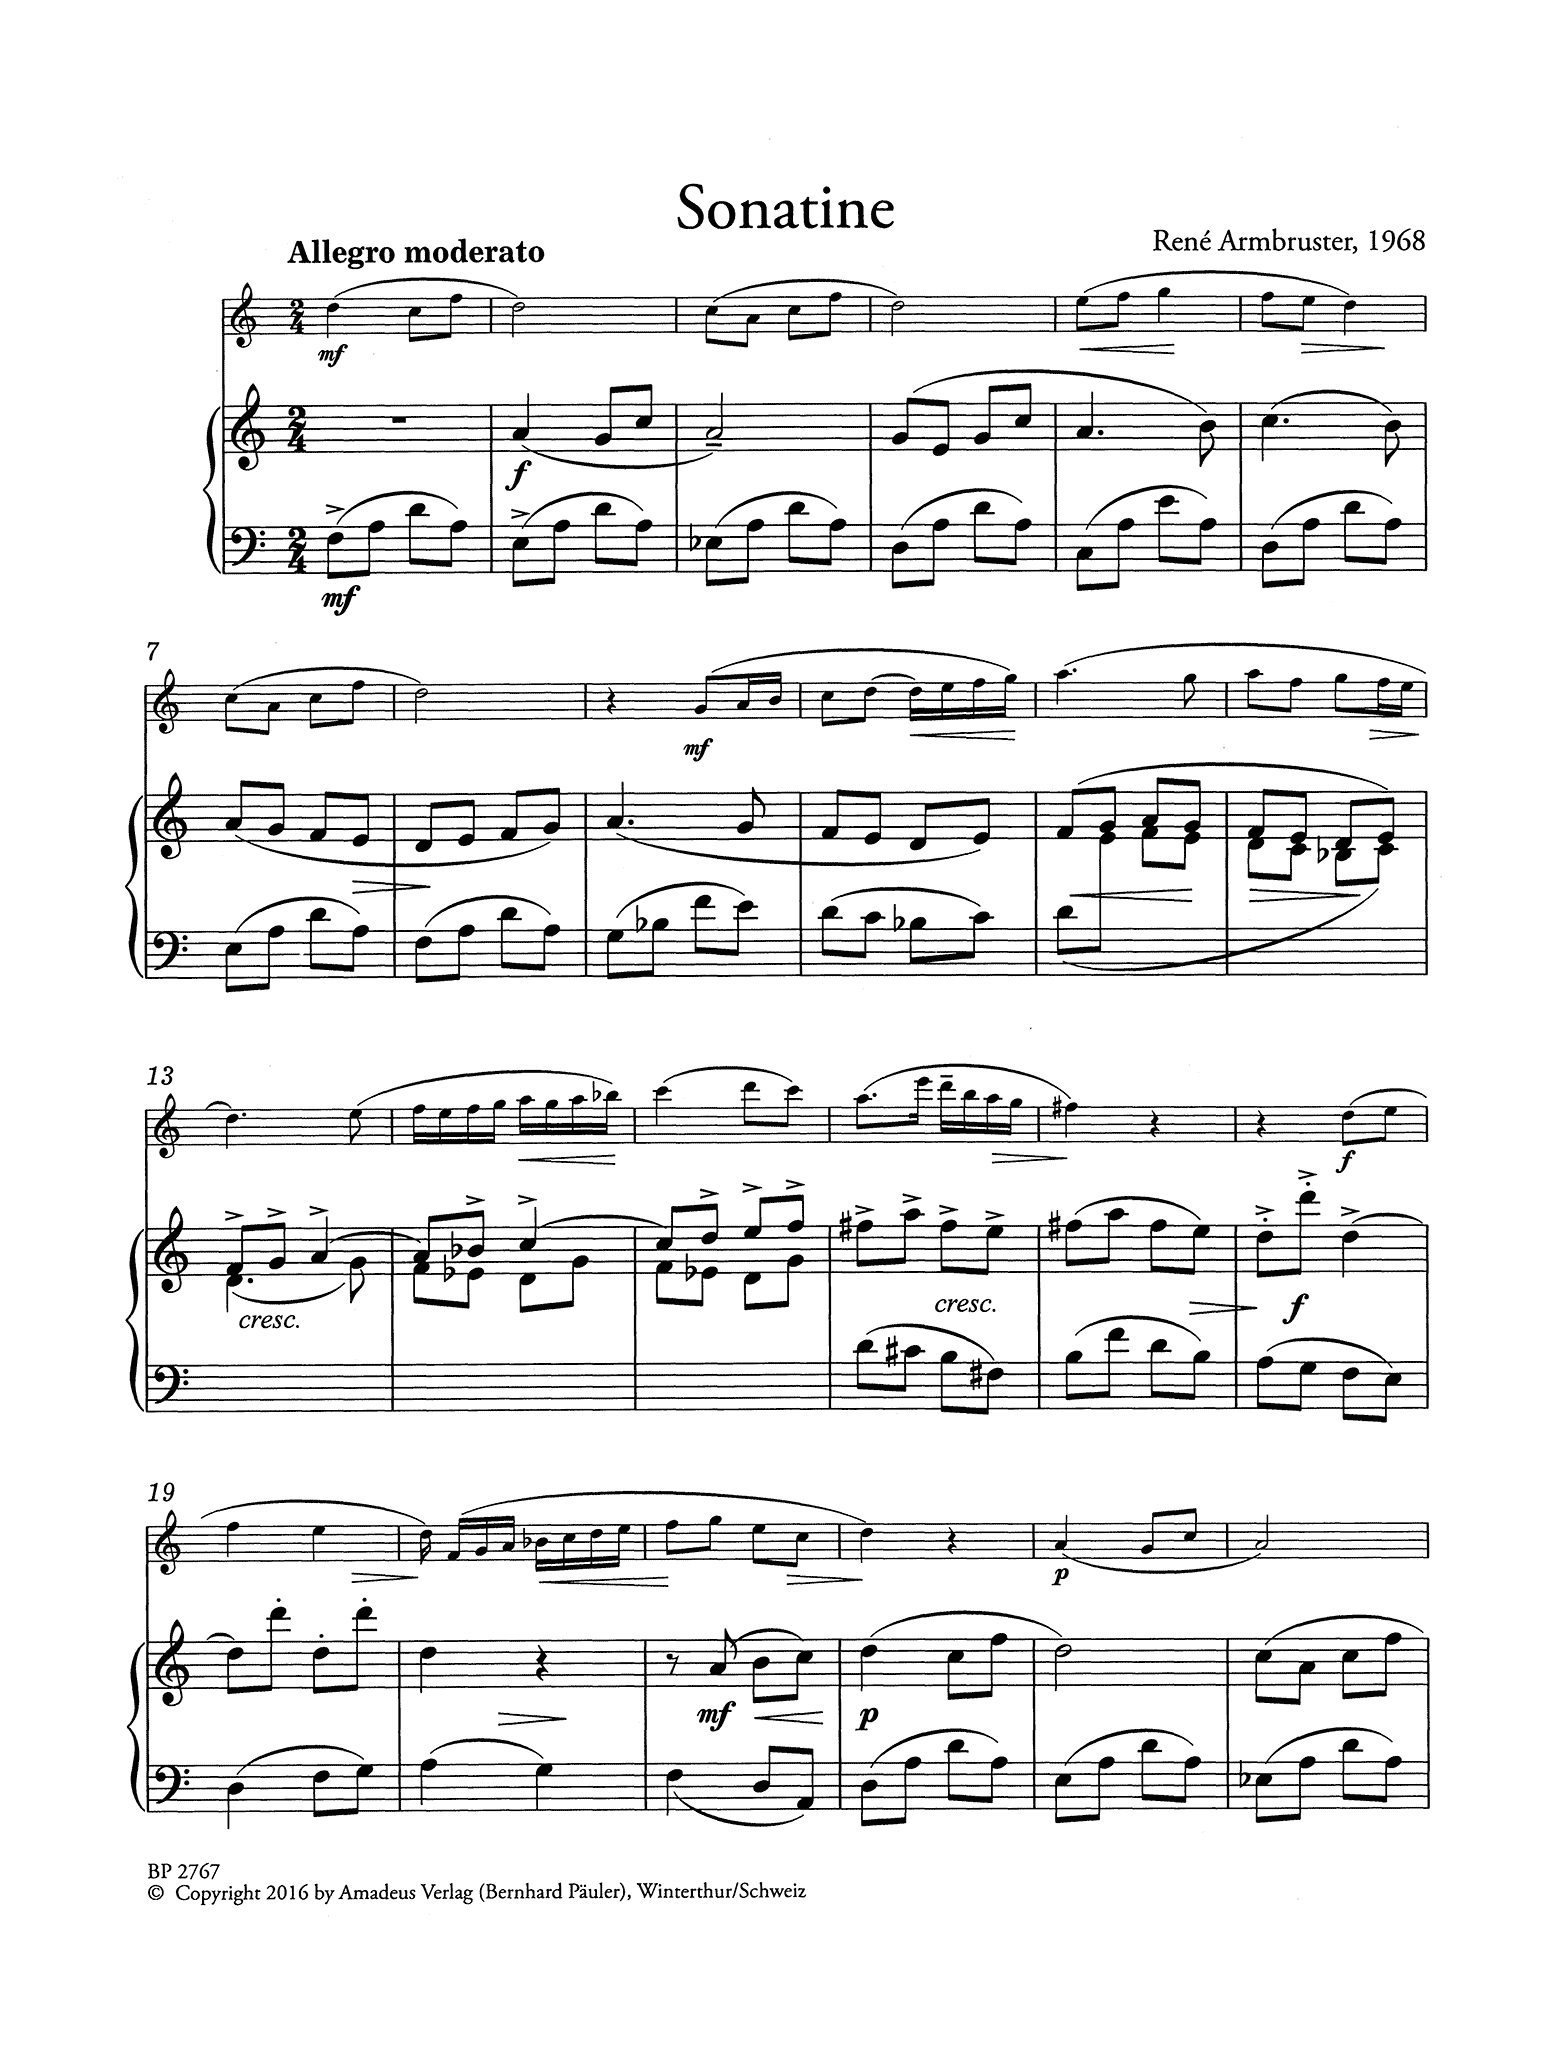 René Armbruster Sonatine clarinet and piano - Movement 1